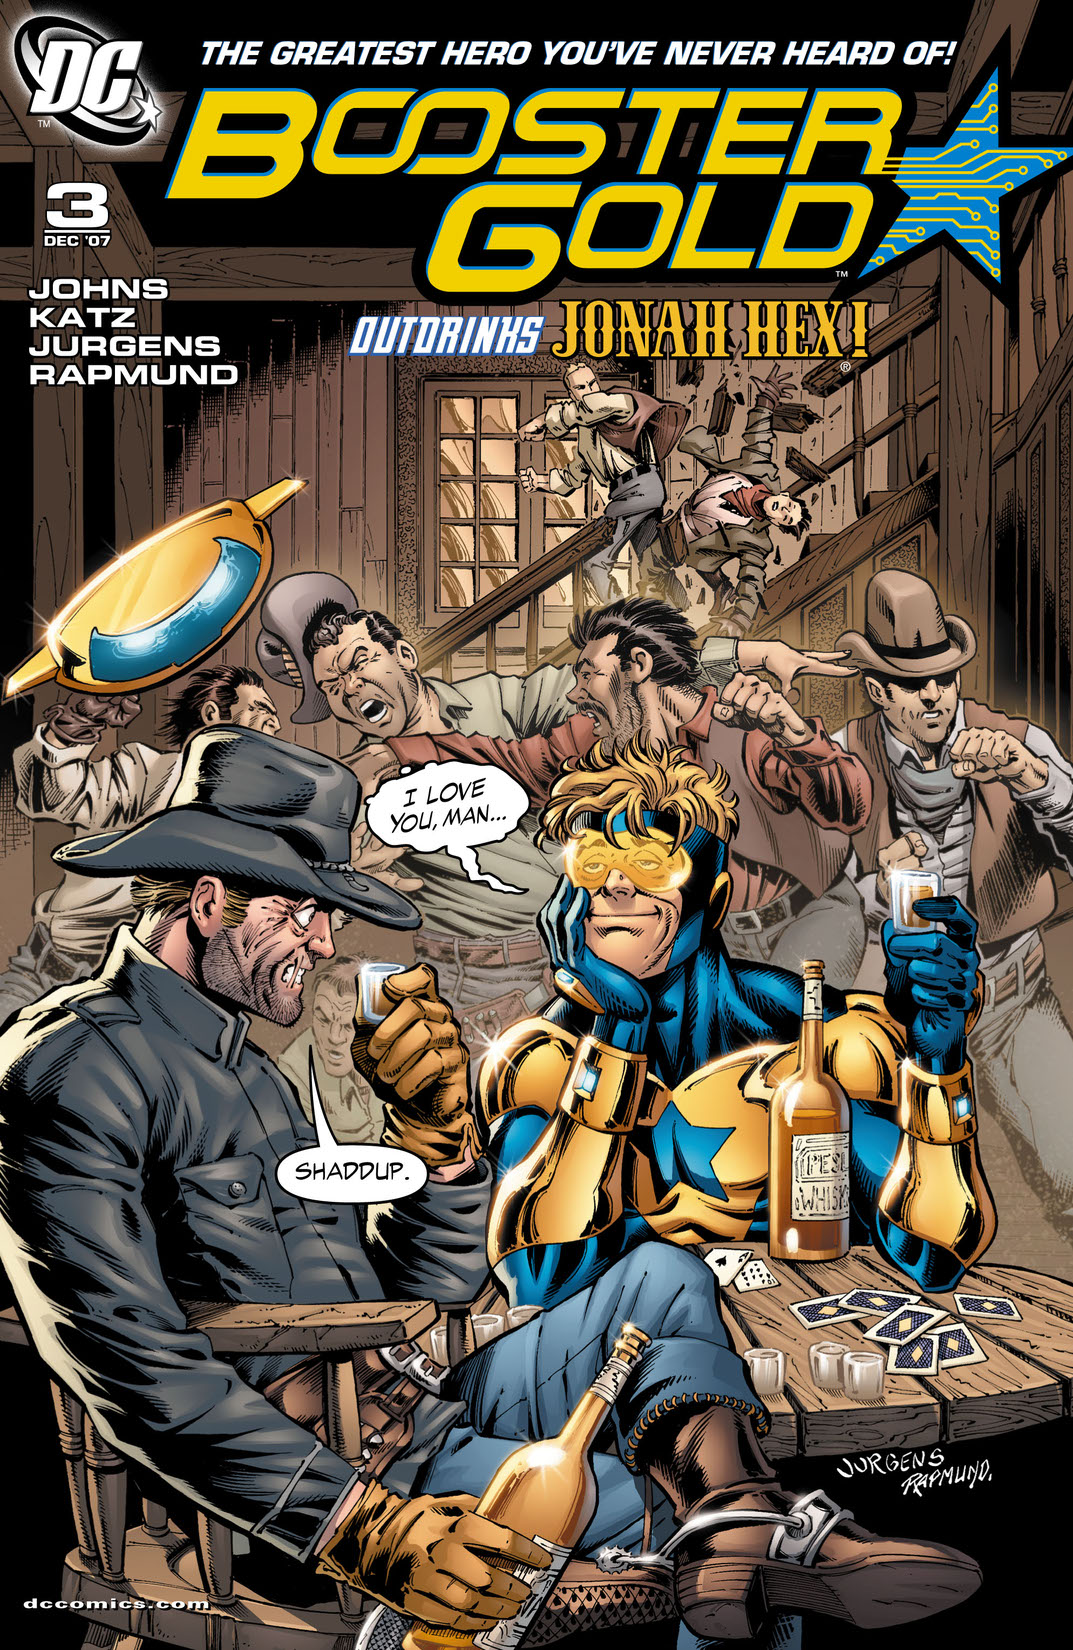 Booster Gold (2007-) #3 preview images